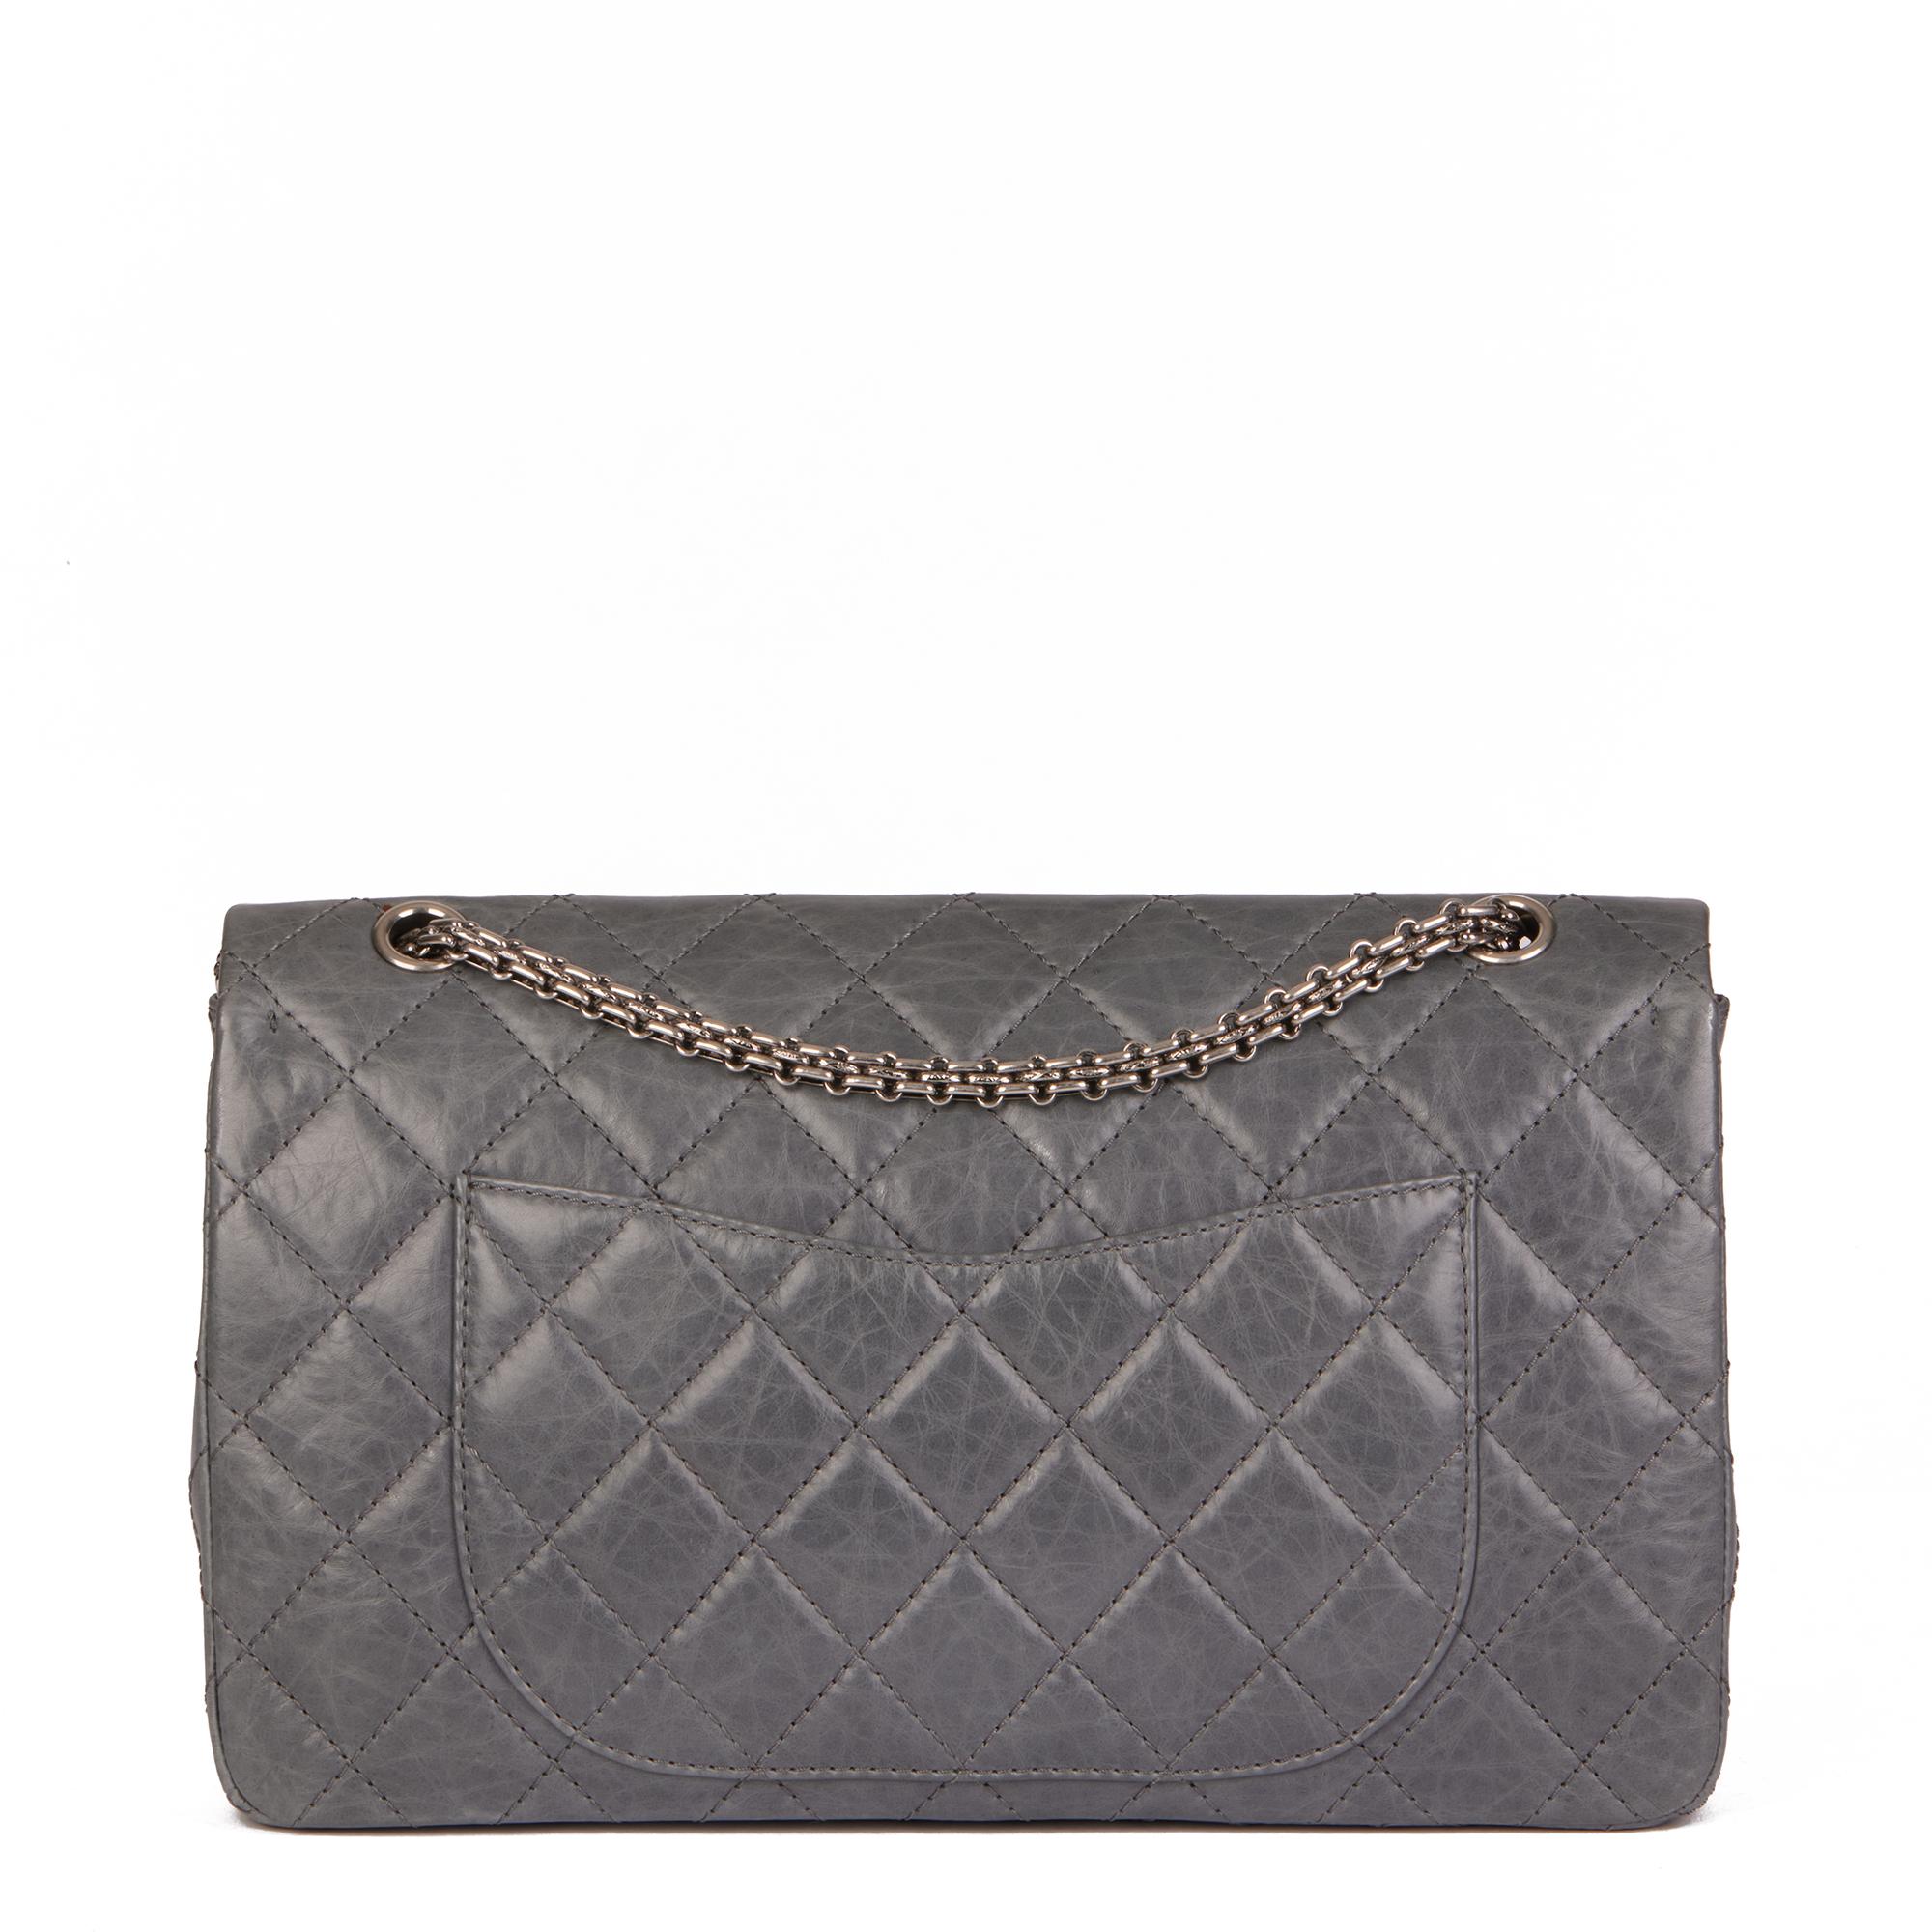 Gray CHANEL Grey Quilted Aged Calfskin Leather 2005 50th Anniversary Edition 227 2.55